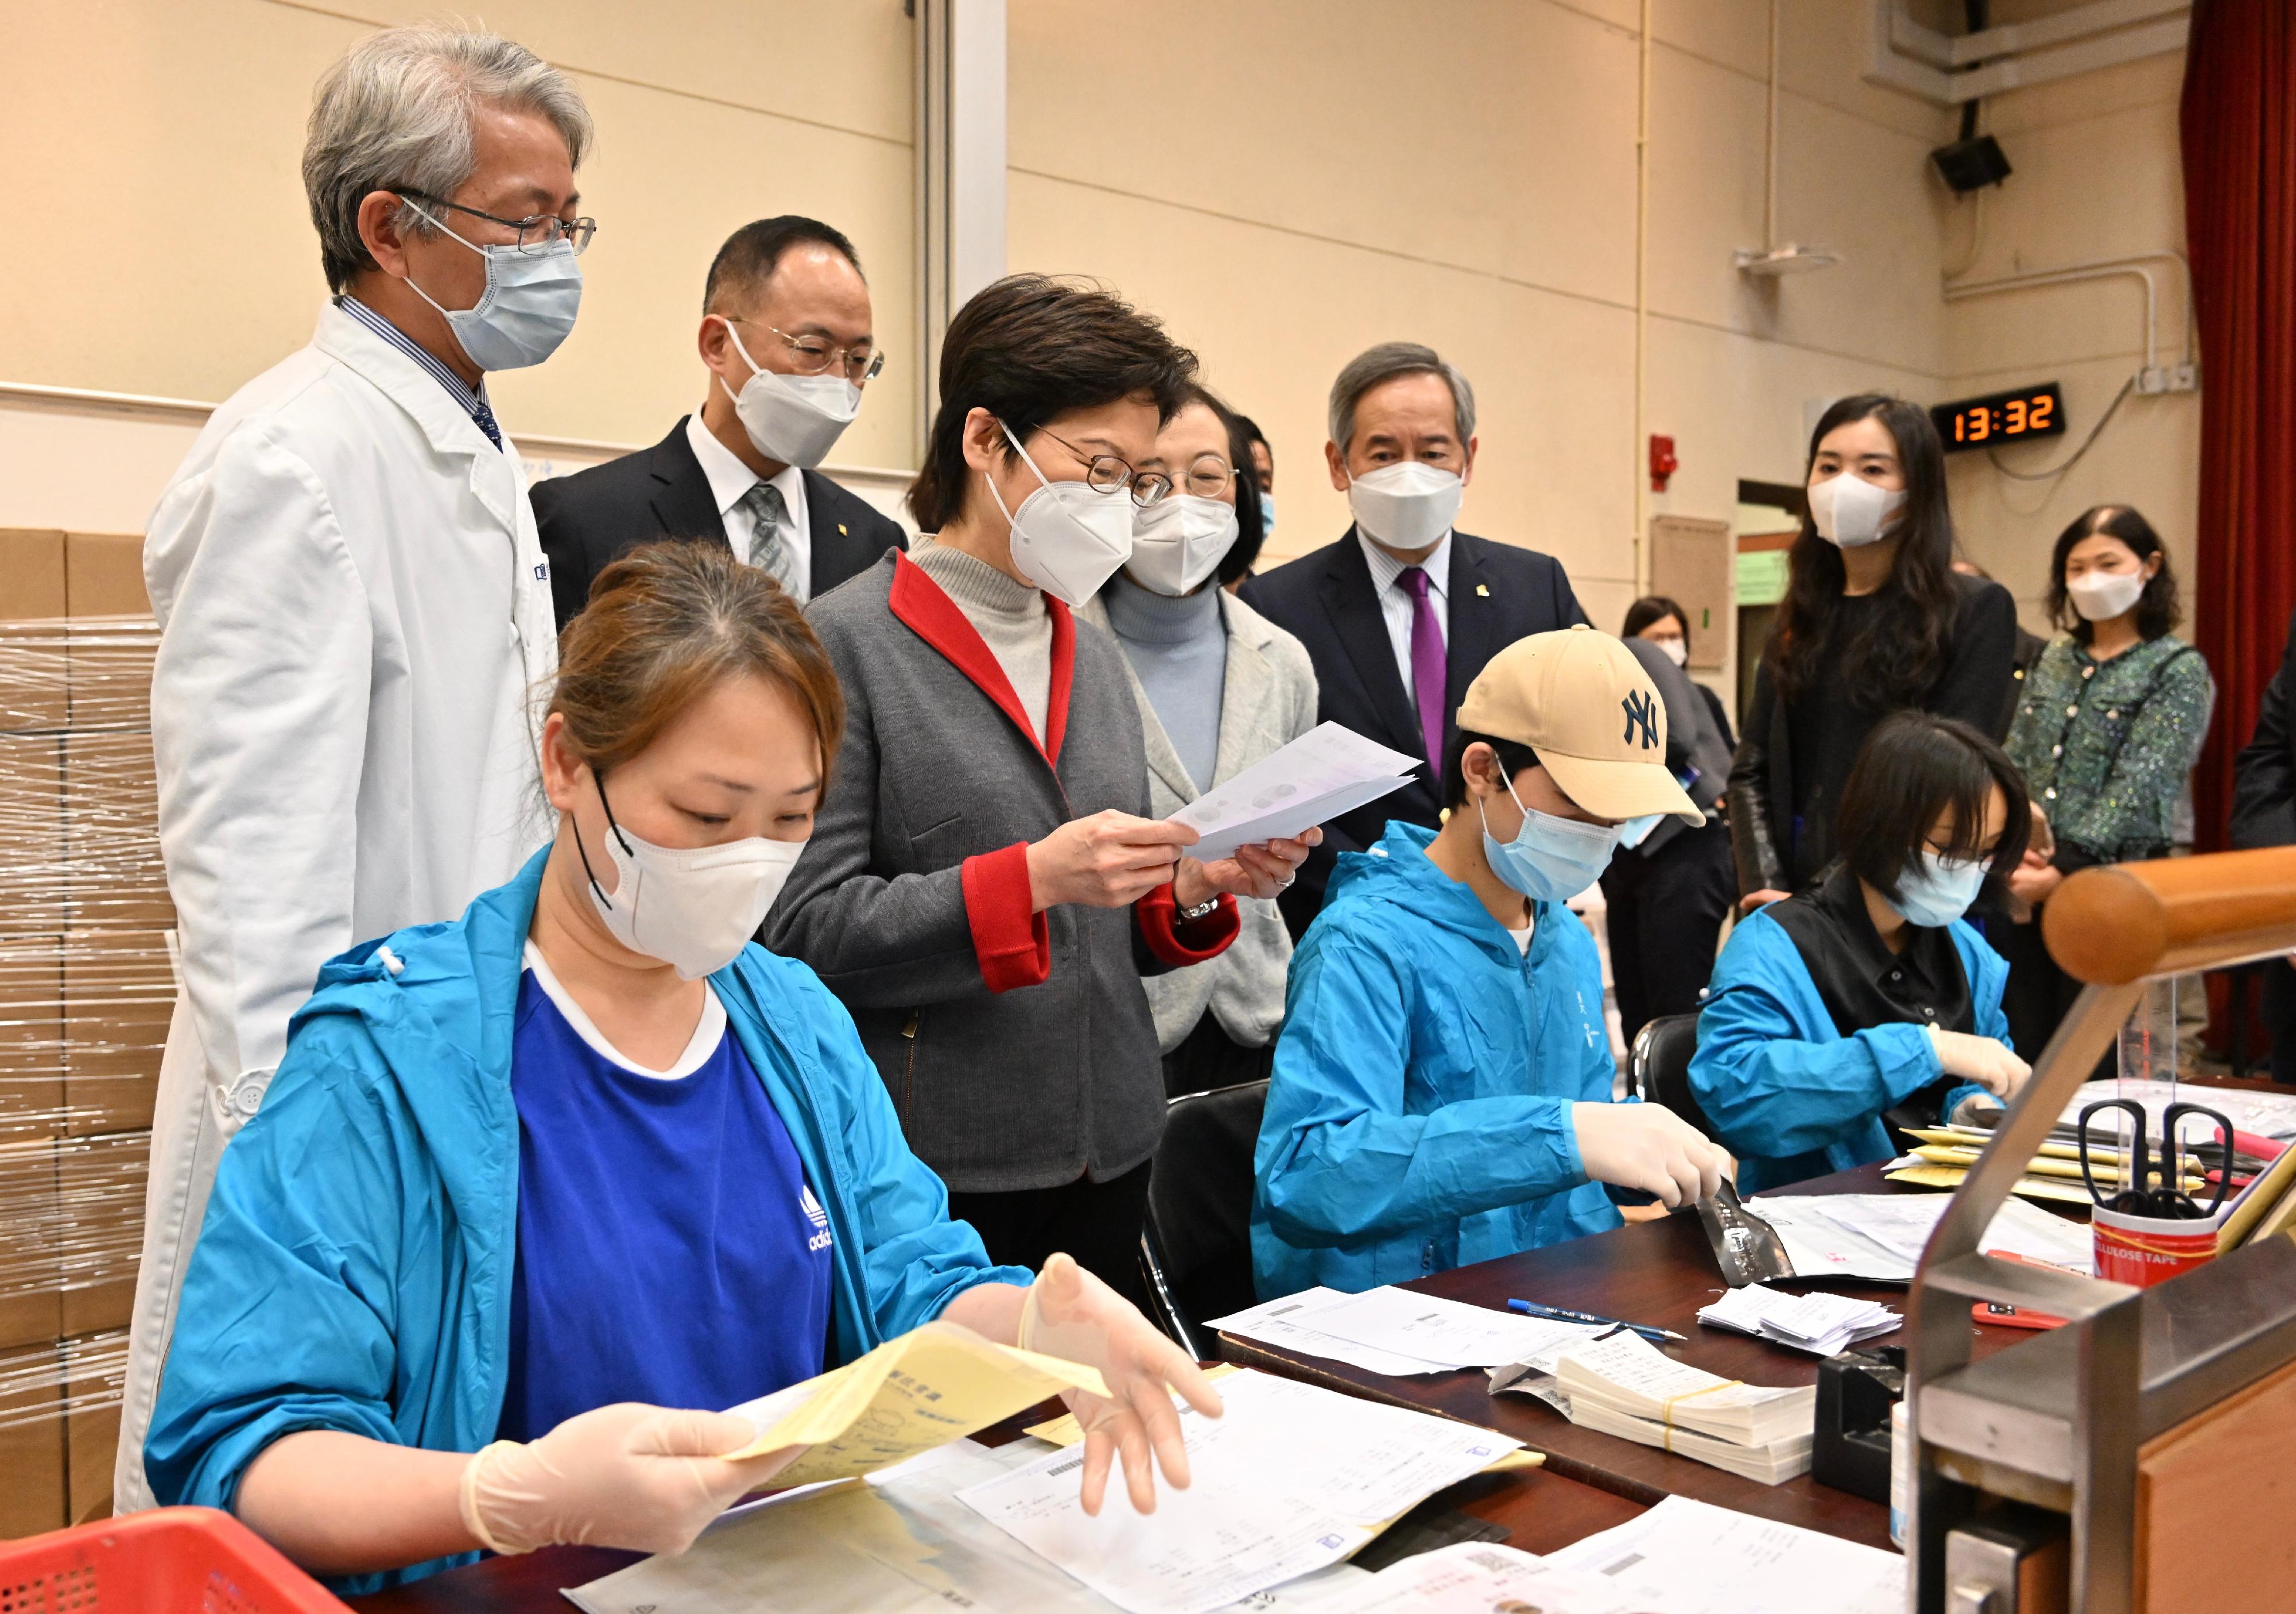 The Chief Executive, Mrs Carrie Lam, visited the Chinese Medicine Telemedicine Centre Against COVID-19 of the Hong Kong Baptist University (HKBU) today (March 12). Photo shows Mrs Lam (third left) inspecting the operation of the delivery centre. Looking on are the Secretary for Food and Health, Professor Sophia Chan (fourth right); the Chairman of the Council of HKBU, Dr Clement Chen (fifth left); the President and Vice-Chancellor of HKBU, Professor Alexander Wai (second left); and the Associate Vice-President (Chinese Medicine Development) and Director of the Clinical Division of the School of Chinese Medicine of HKBU, Professor Bian Zhaoxiang (first left).